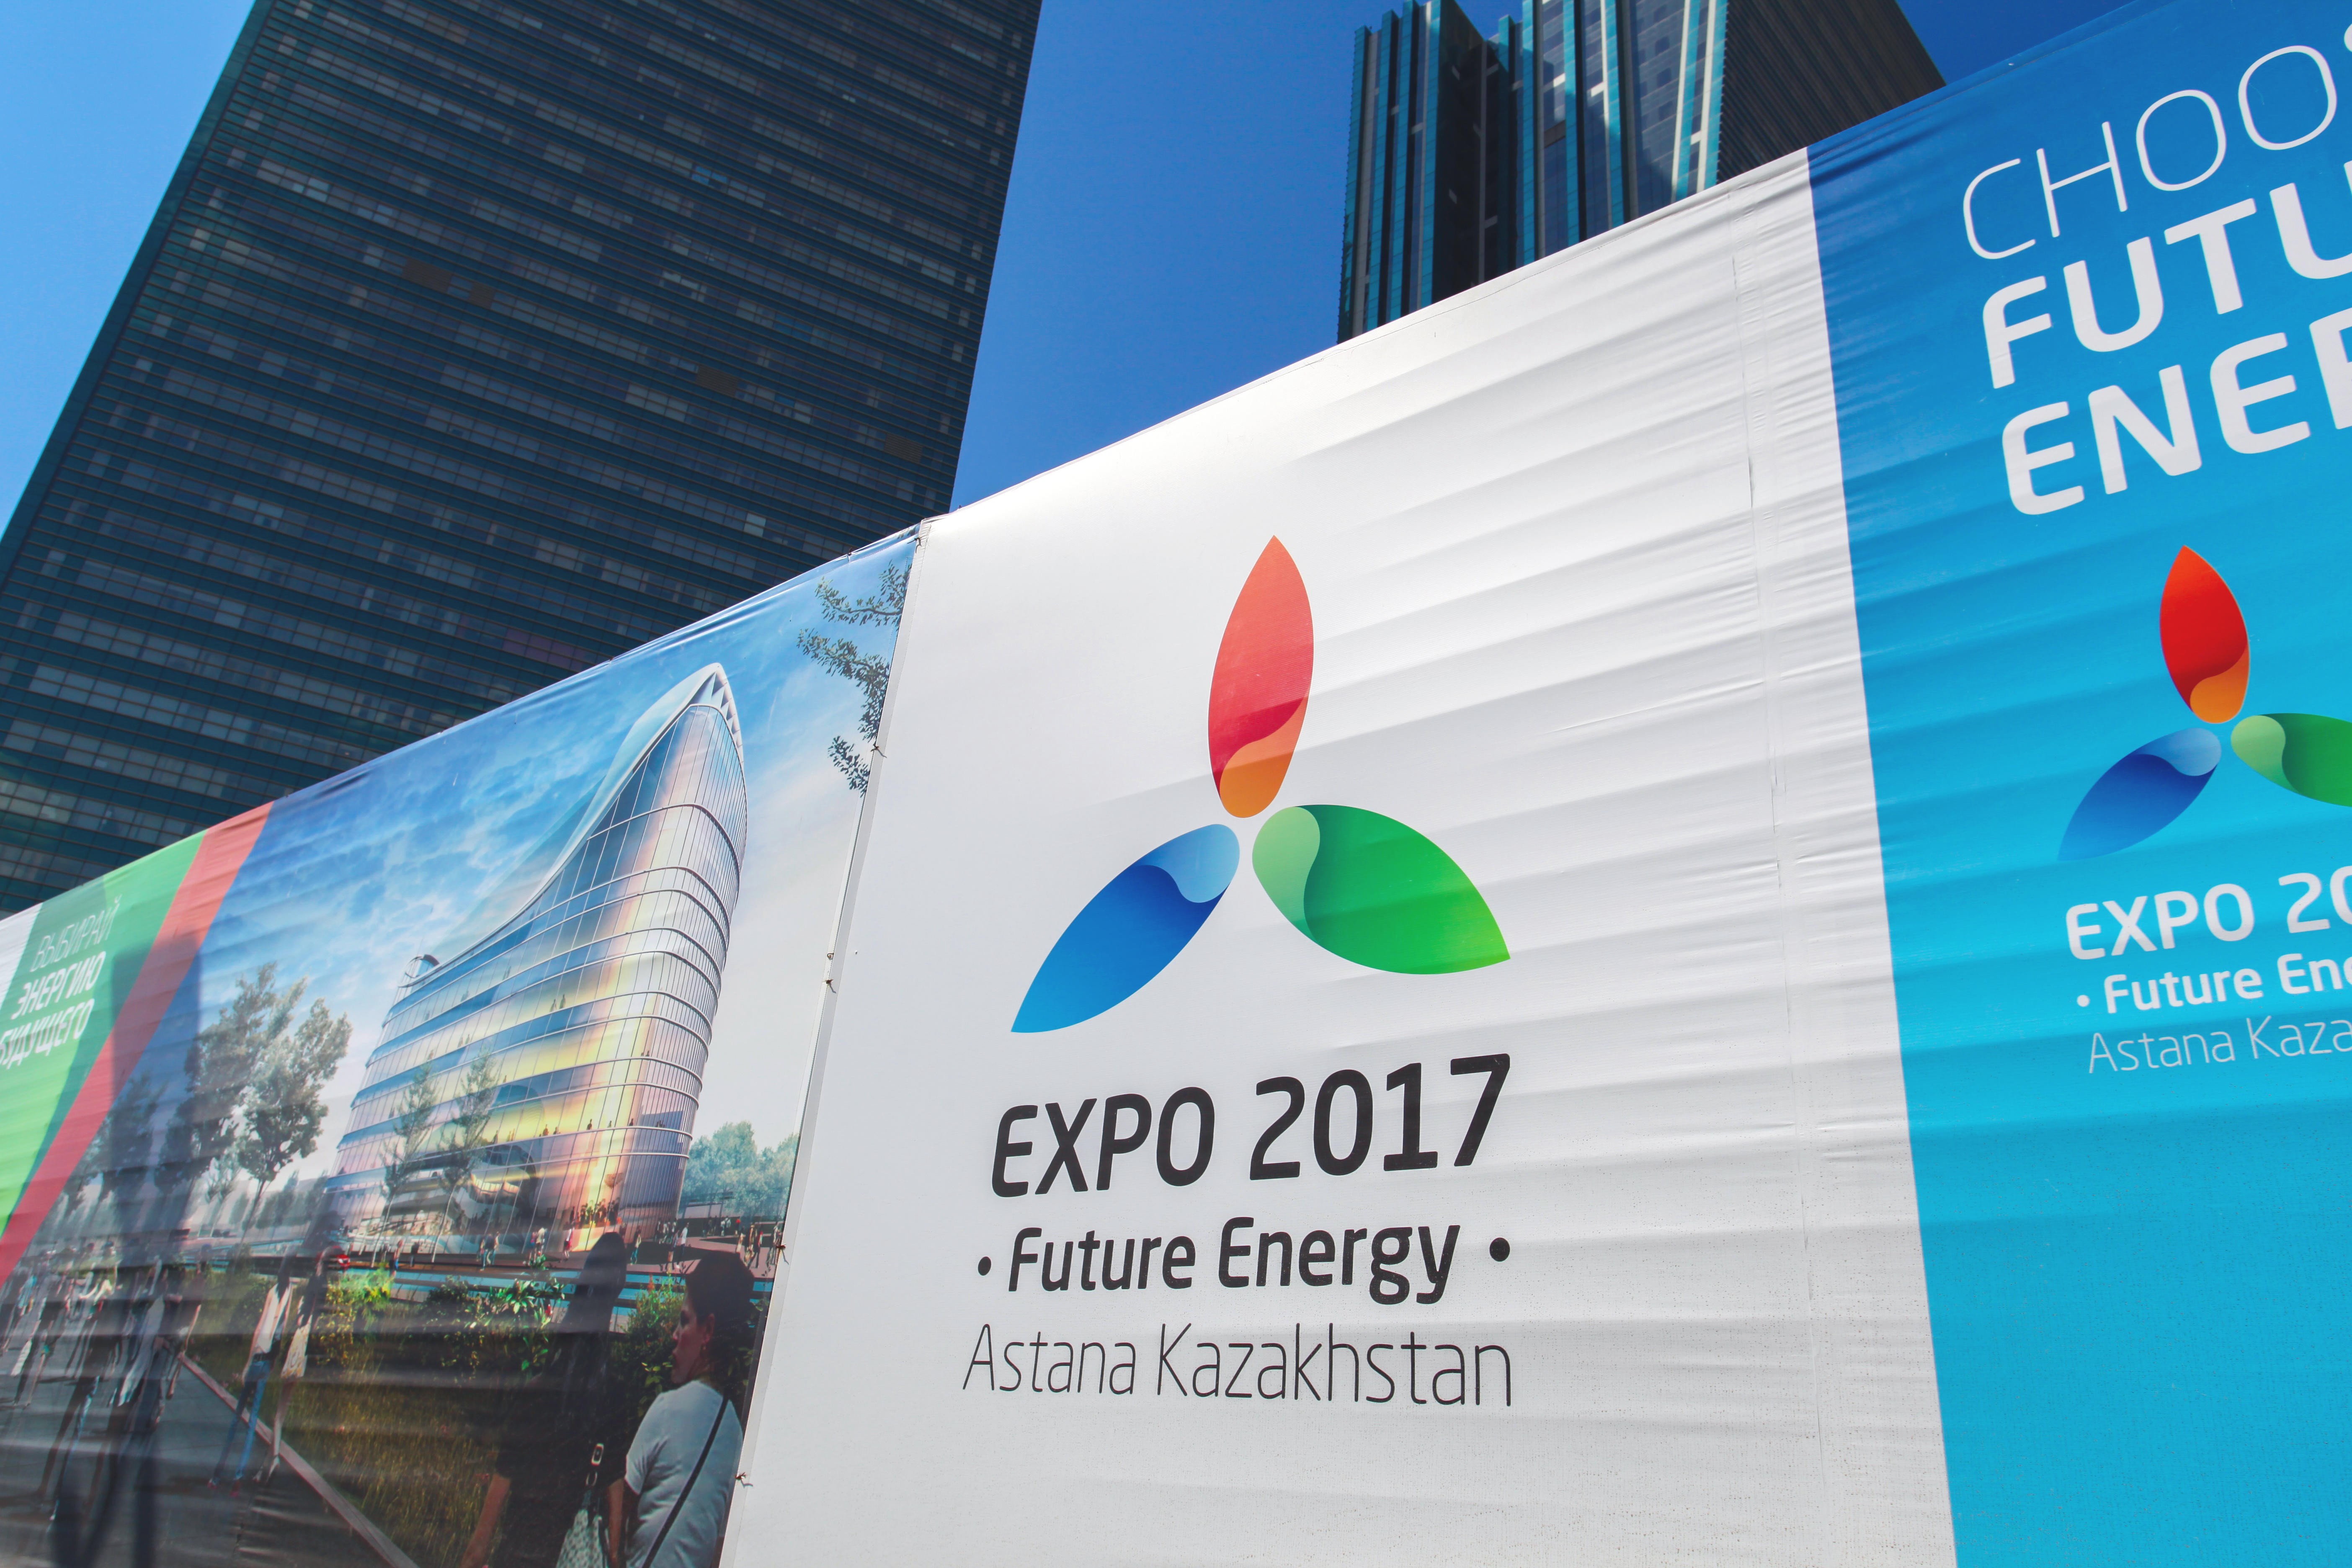 Expo 2017 in Astana explored how to ensure safe and sustainable access to energy while reducing CO2 emissions.